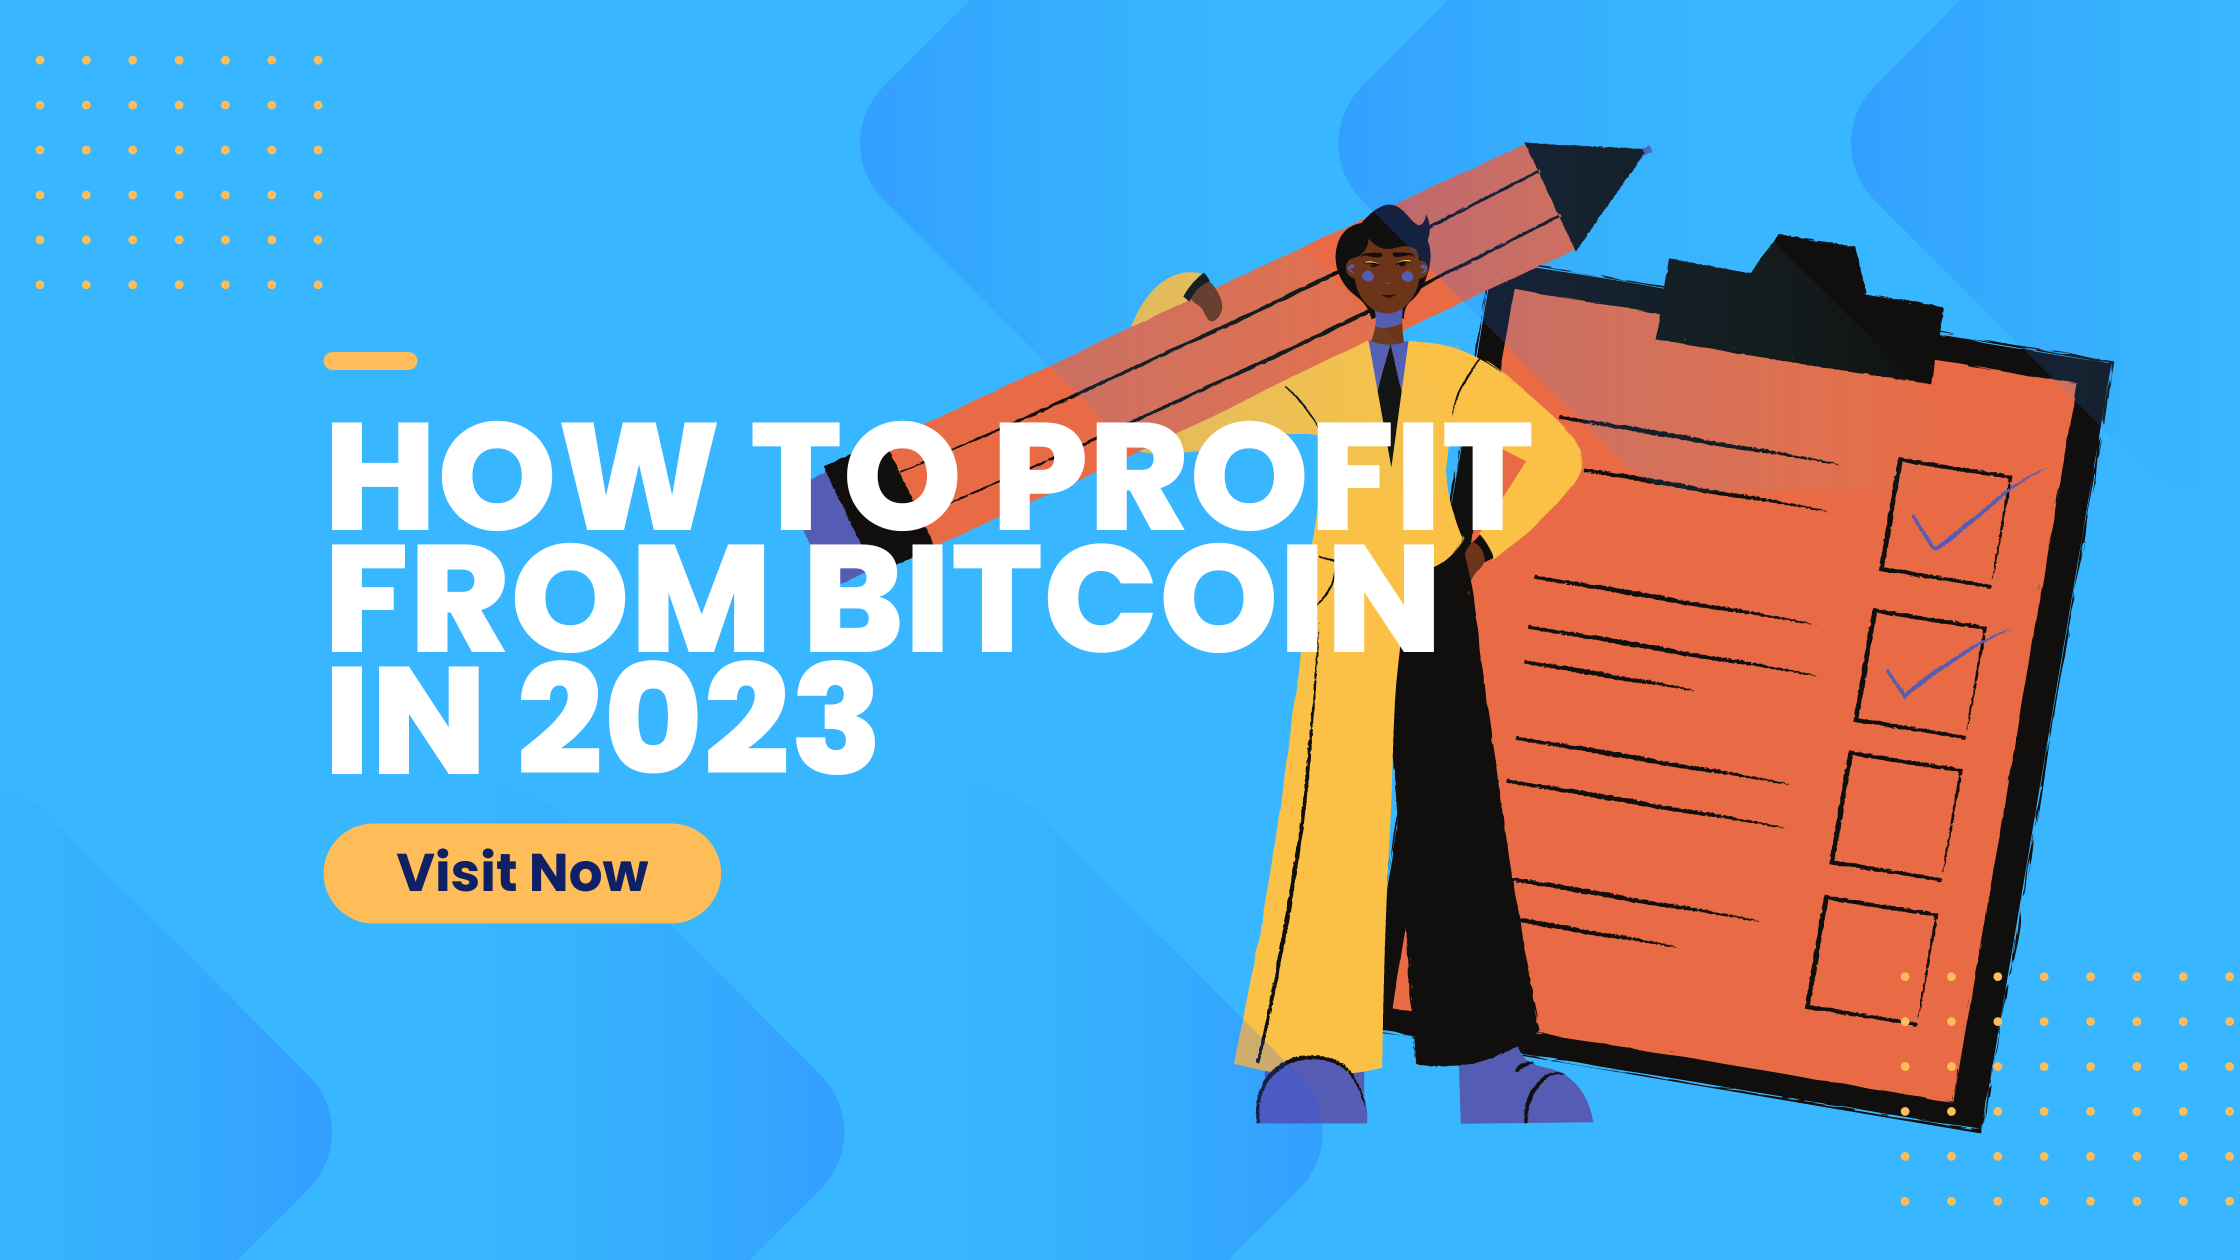 How to Profit from Bitcoin Price Fluctuations in 2023